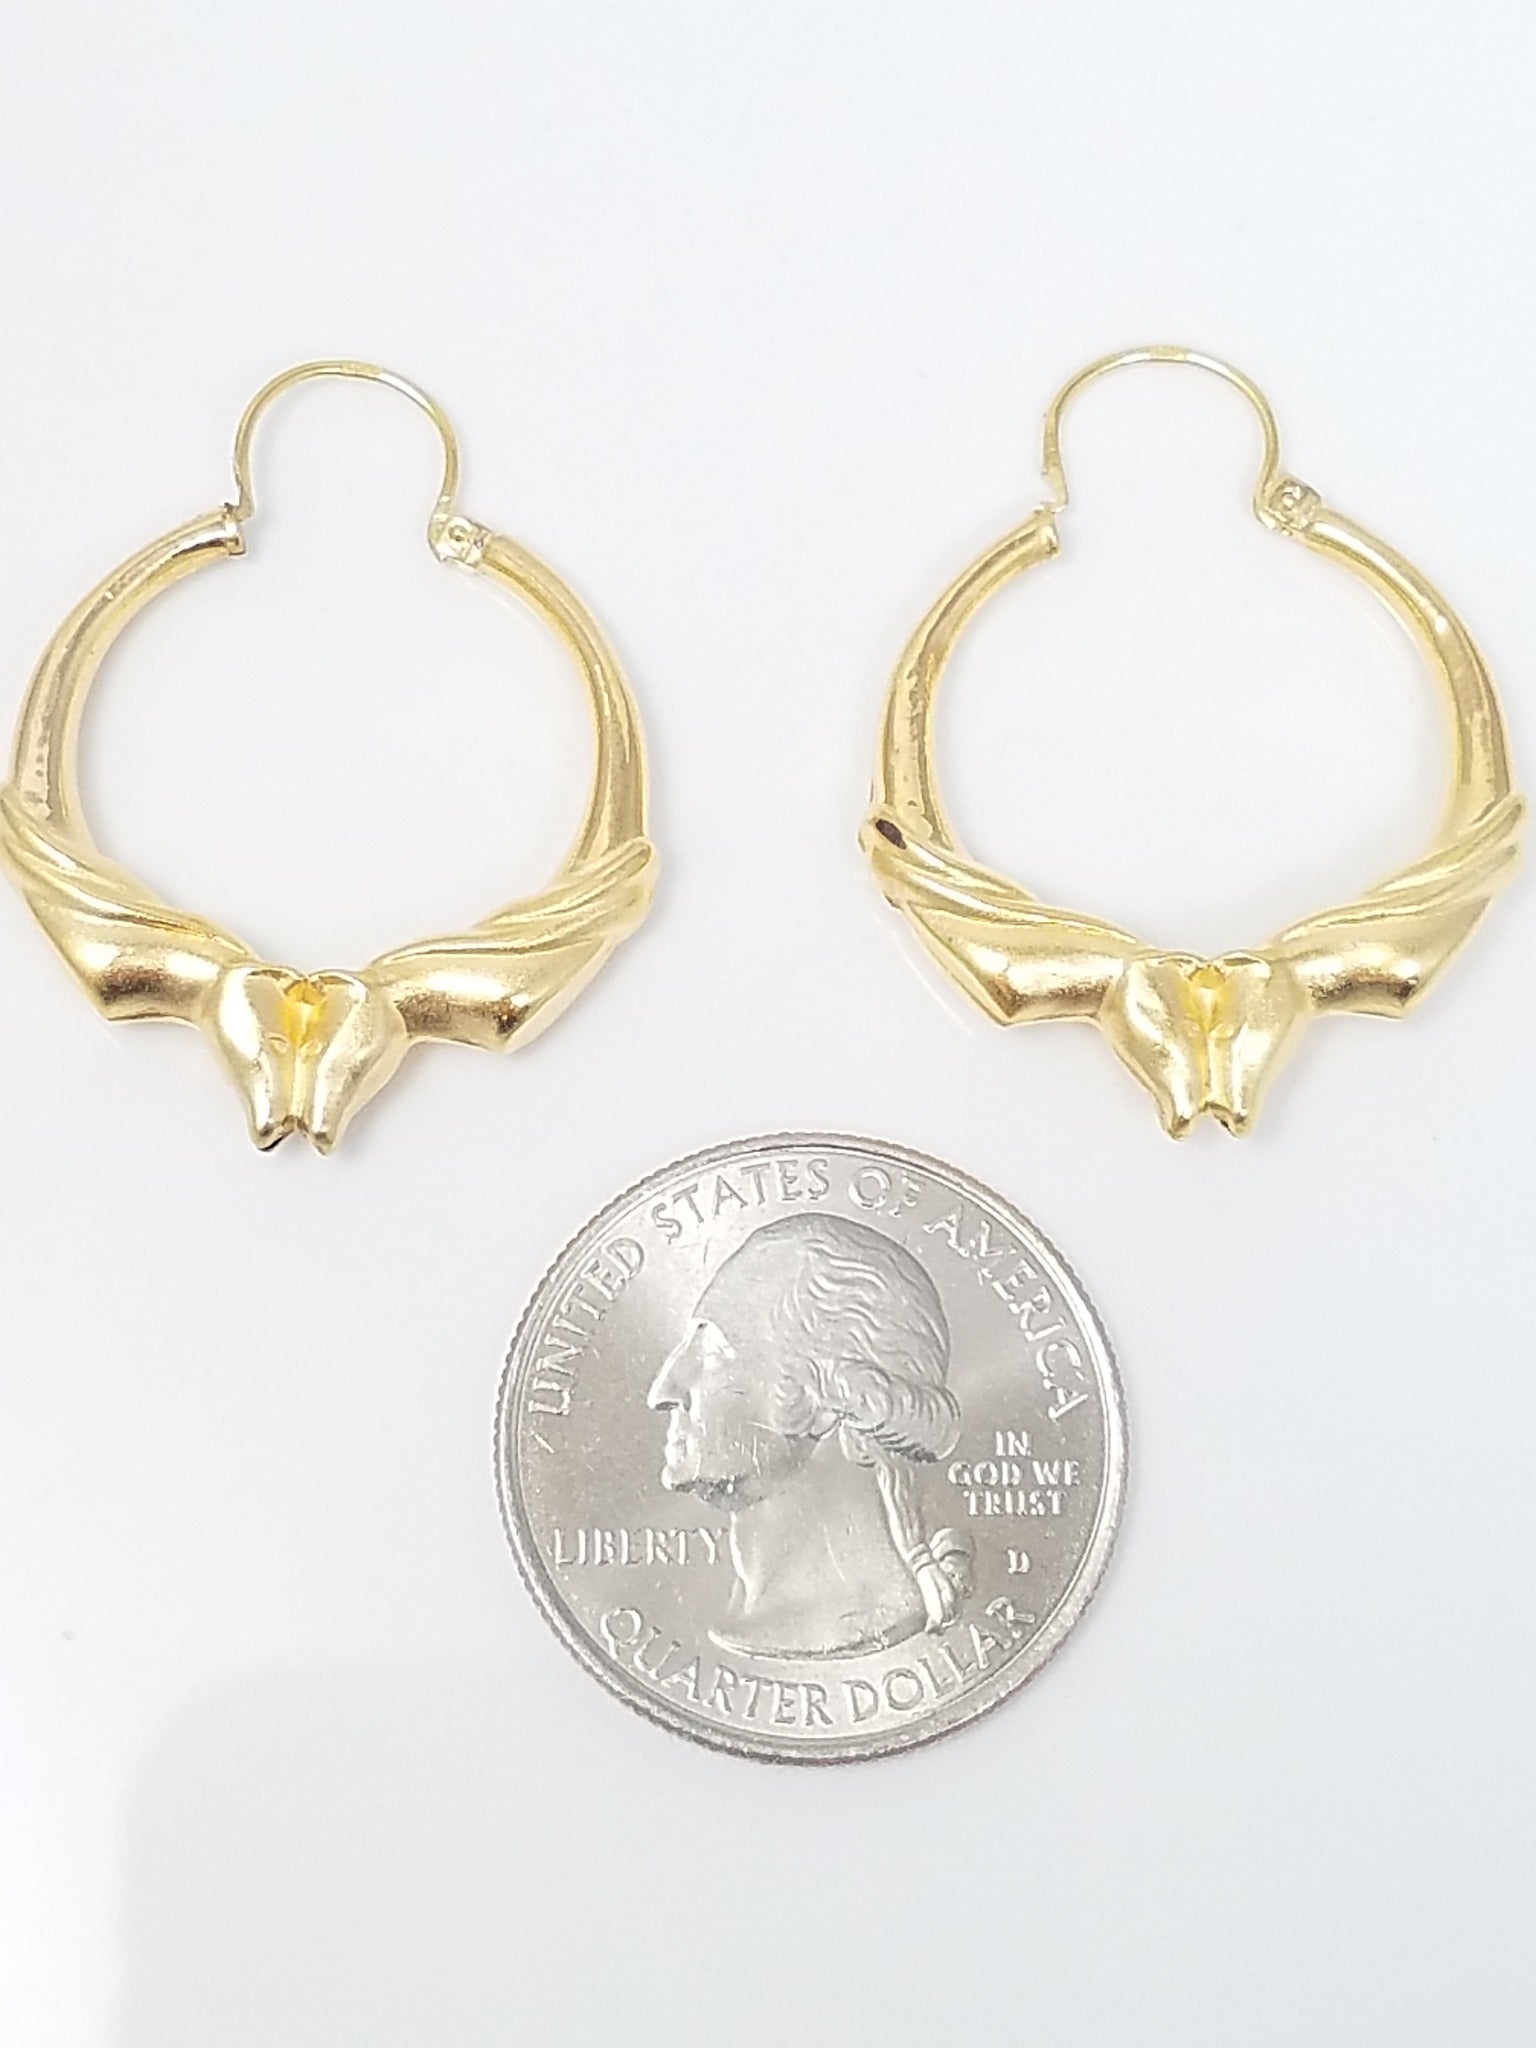 Vintage 18k Hollow Yellow Gold Horse Hoop Earrings French